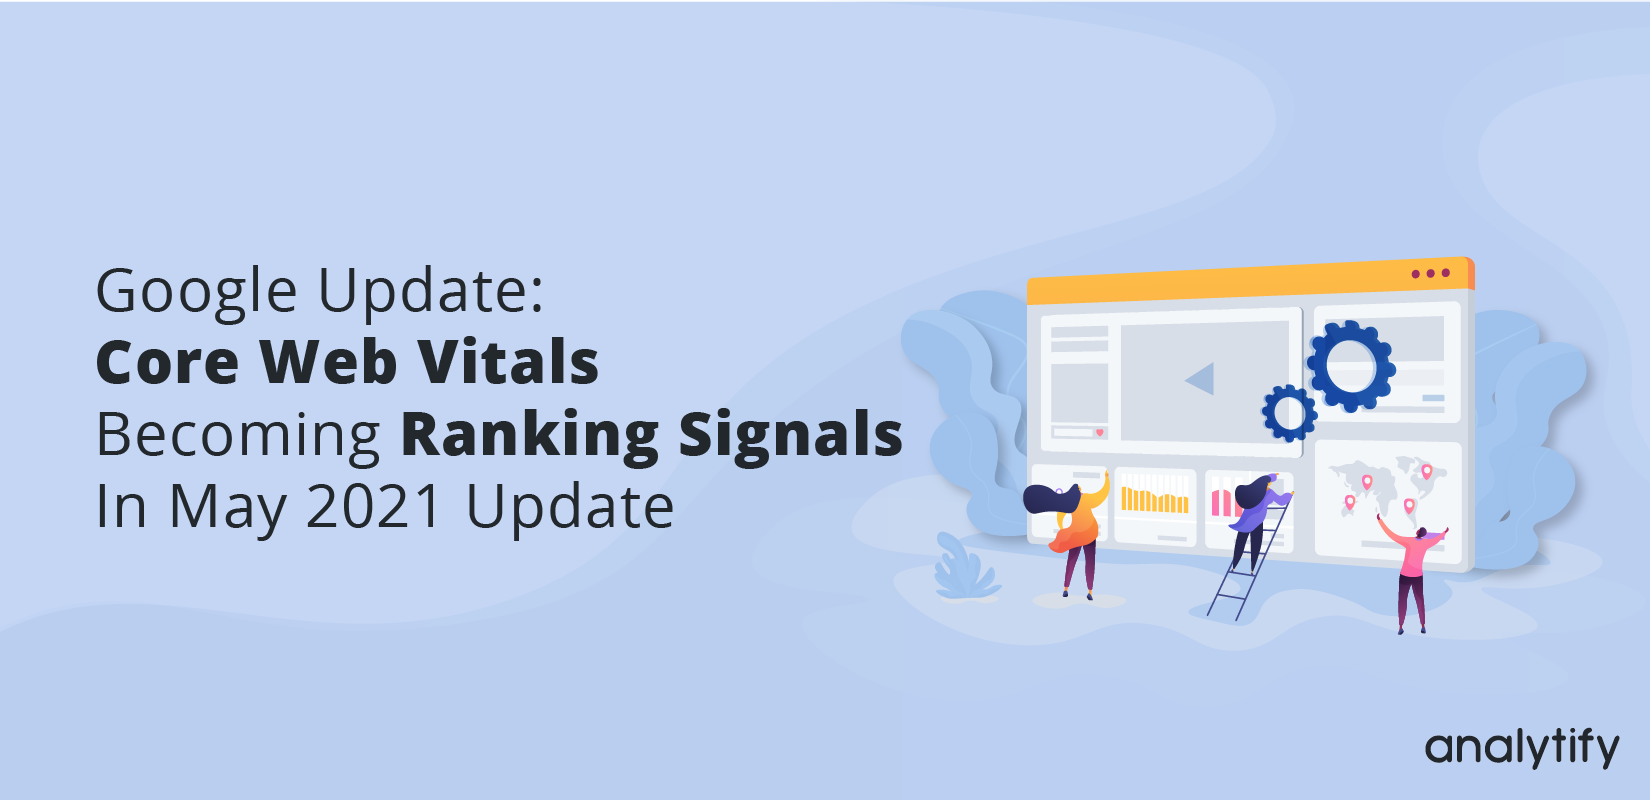 Core Web Vitals Becoming Ranking Signals in May 2021 Update